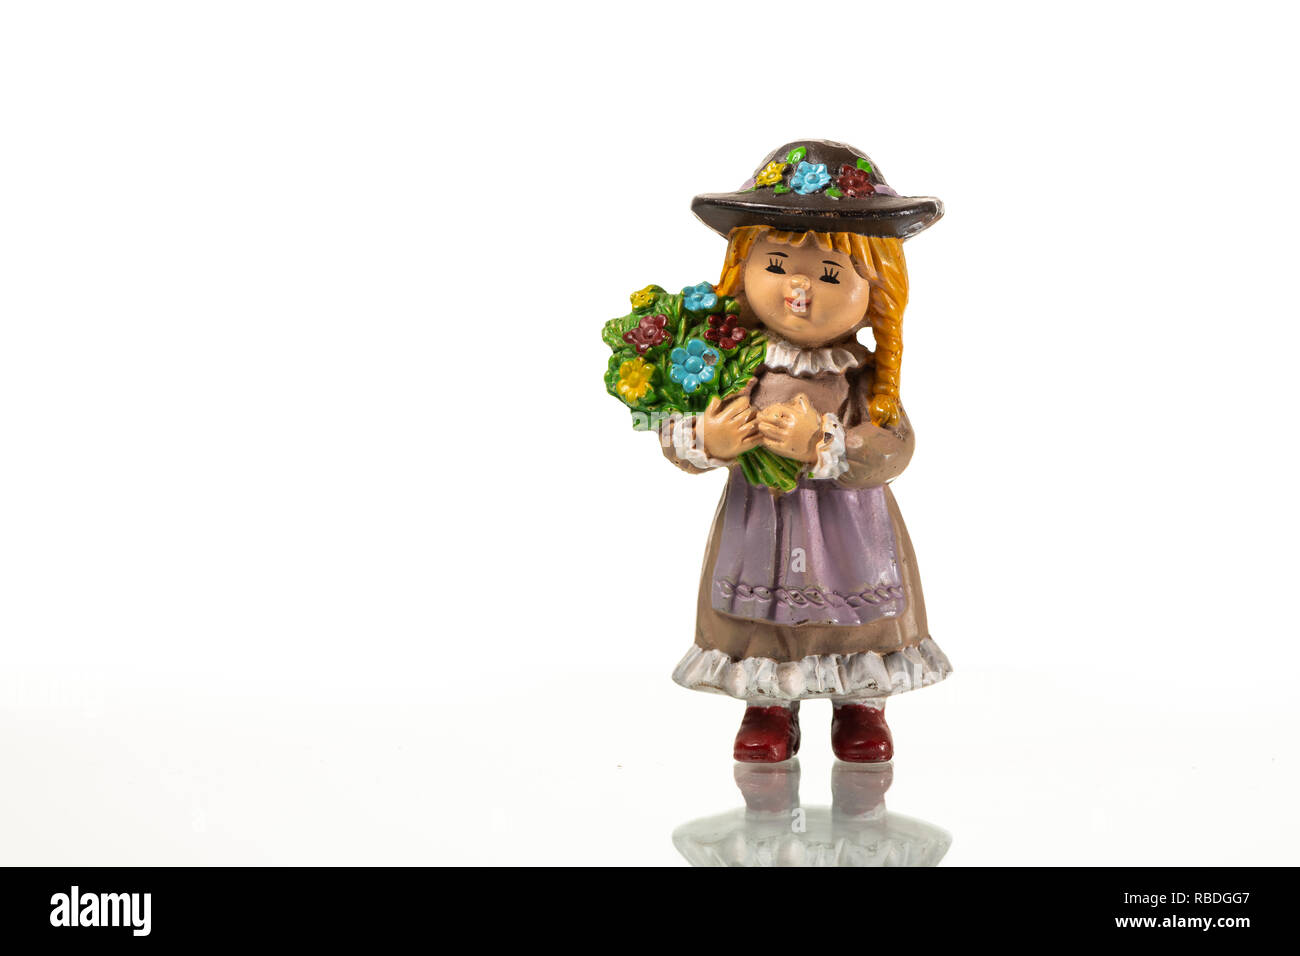 A small figurine of a girl holding flowers, white background Stock Photo